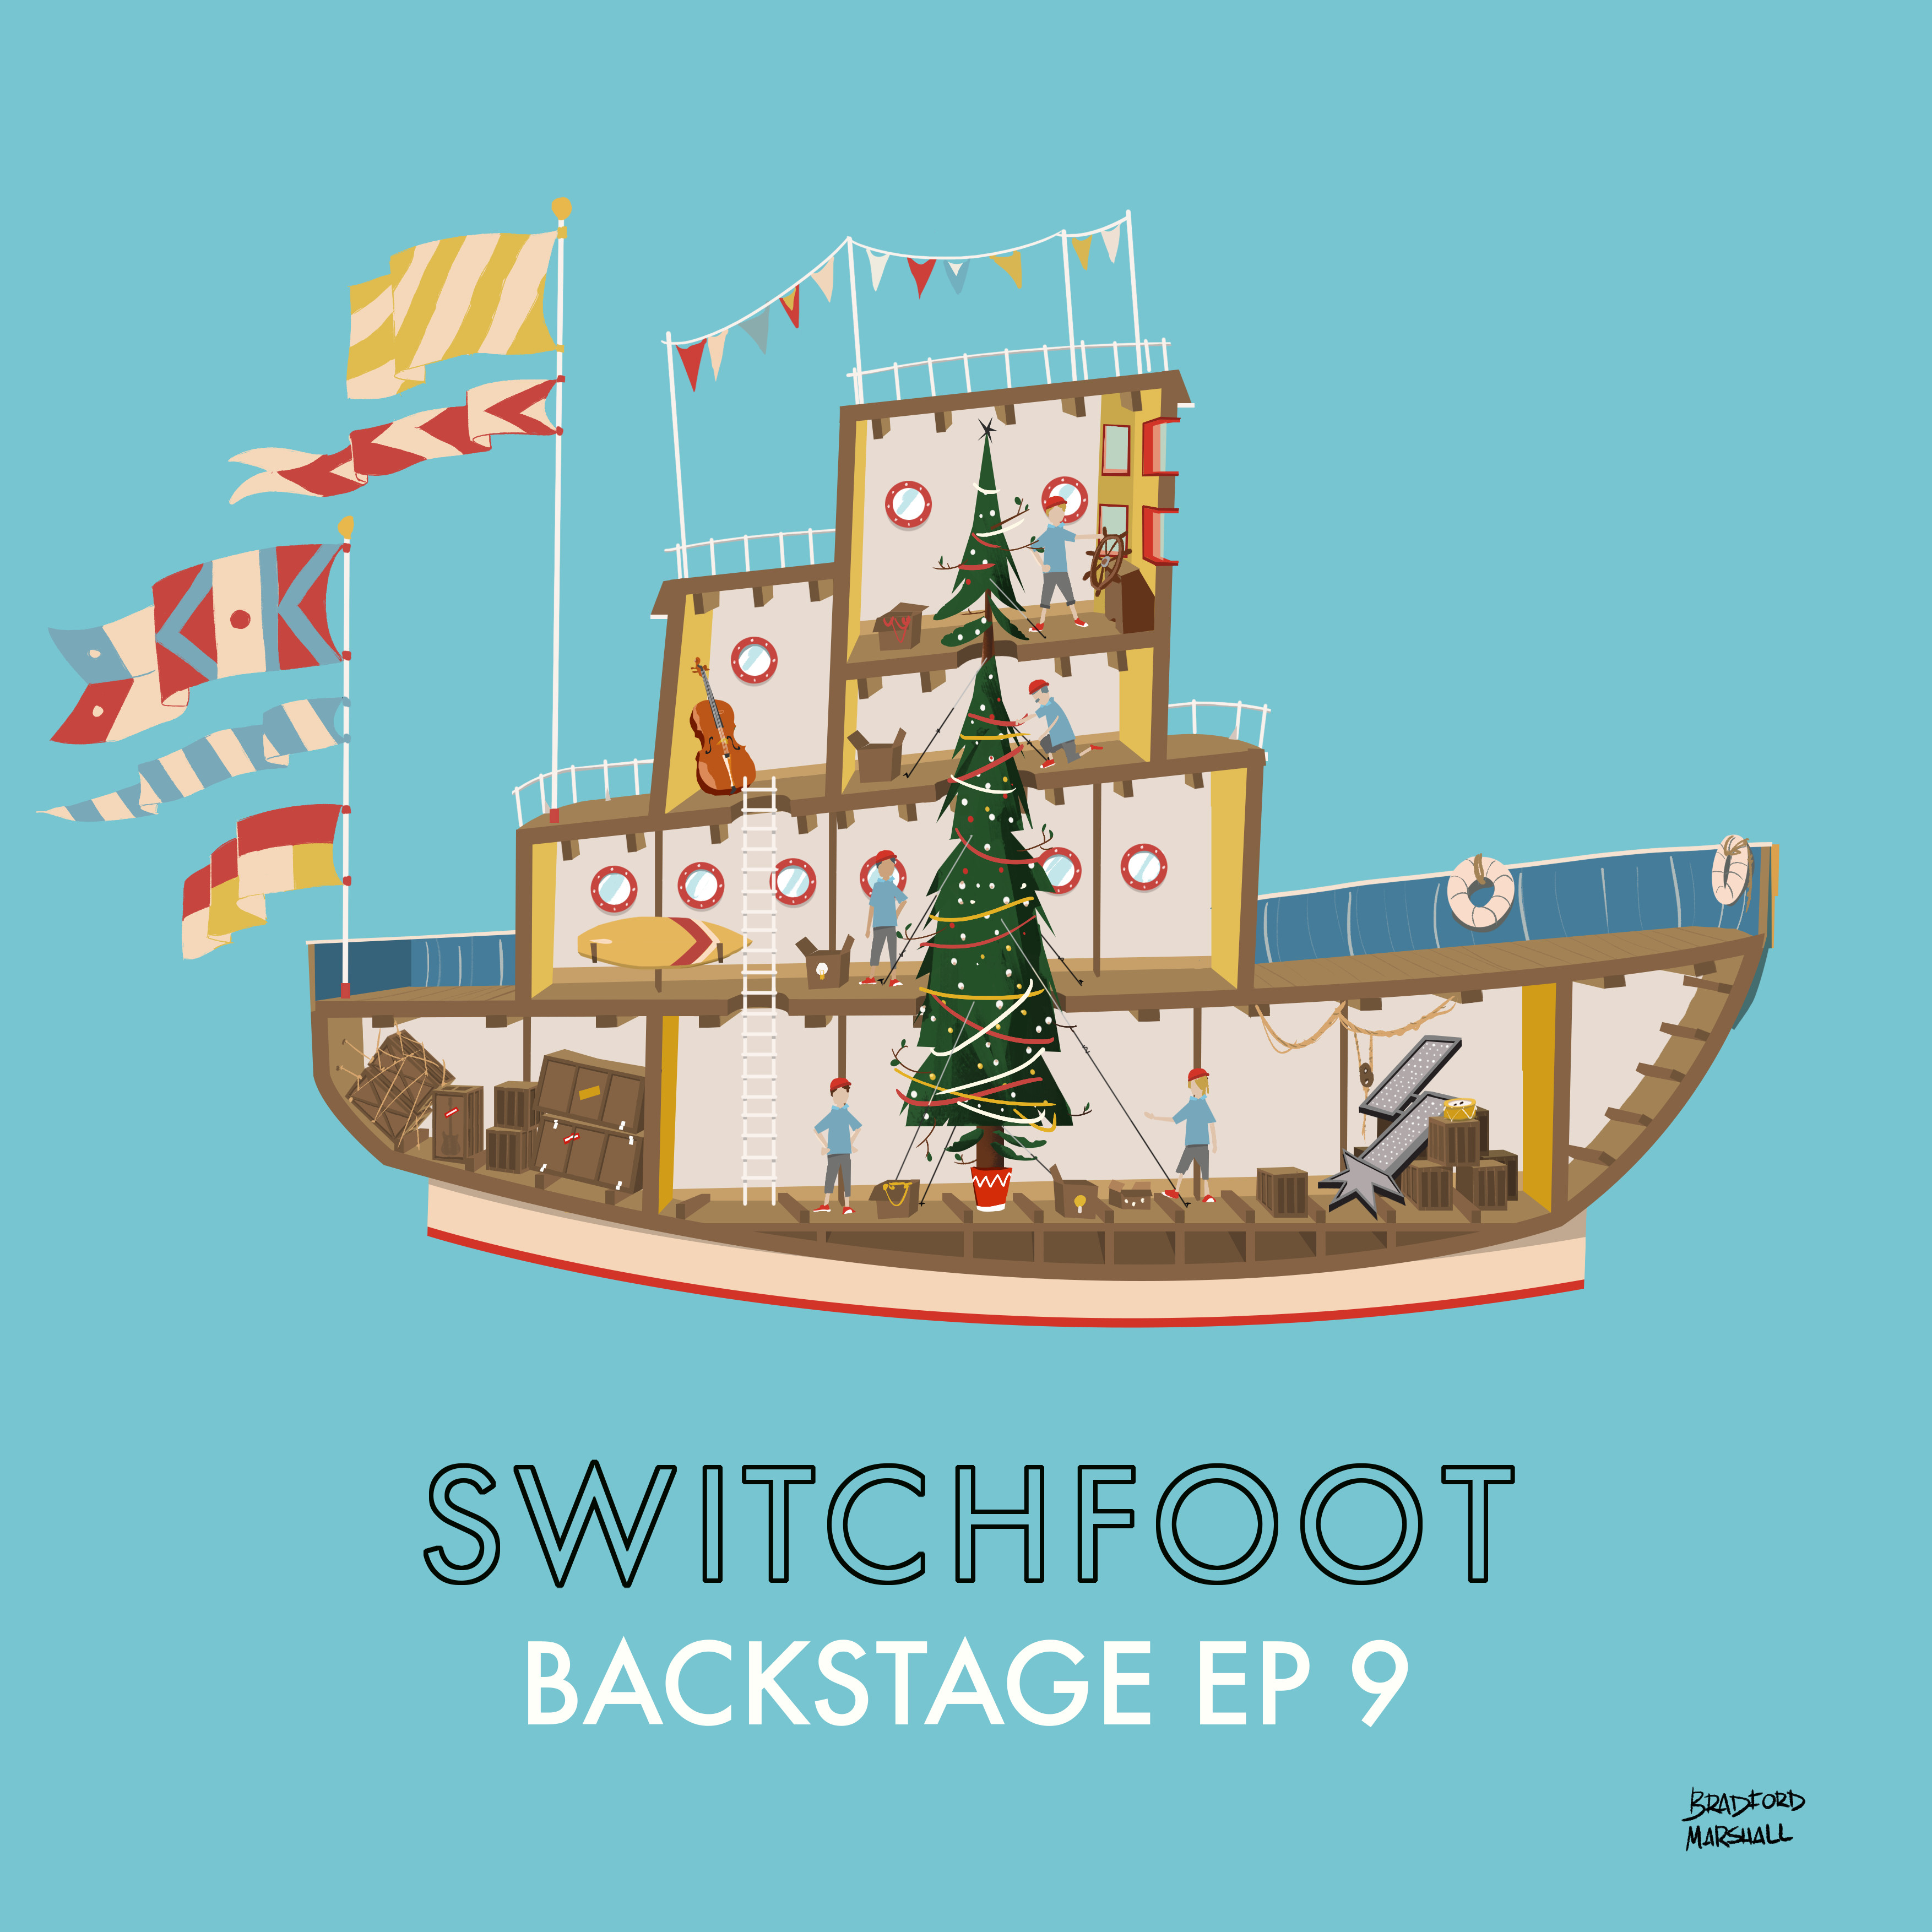 Switchfoot Backstage Ep 9 (2020) by Bradford Marshall